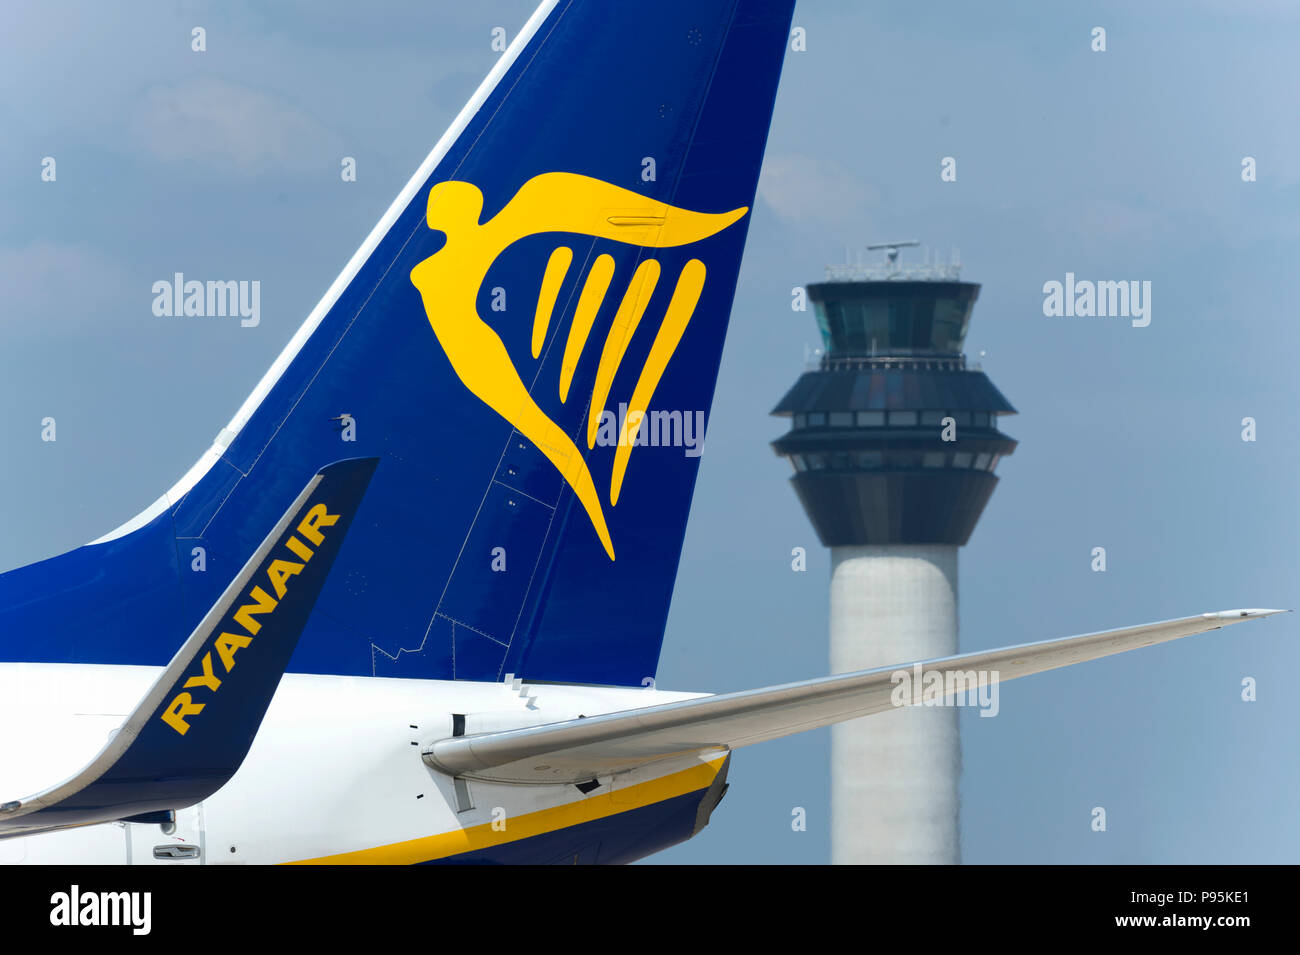 The tailfin of Ryanair Boeing 737-800 taxiing along the runway in front of the control tower at Manchester Airport. Stock Photo